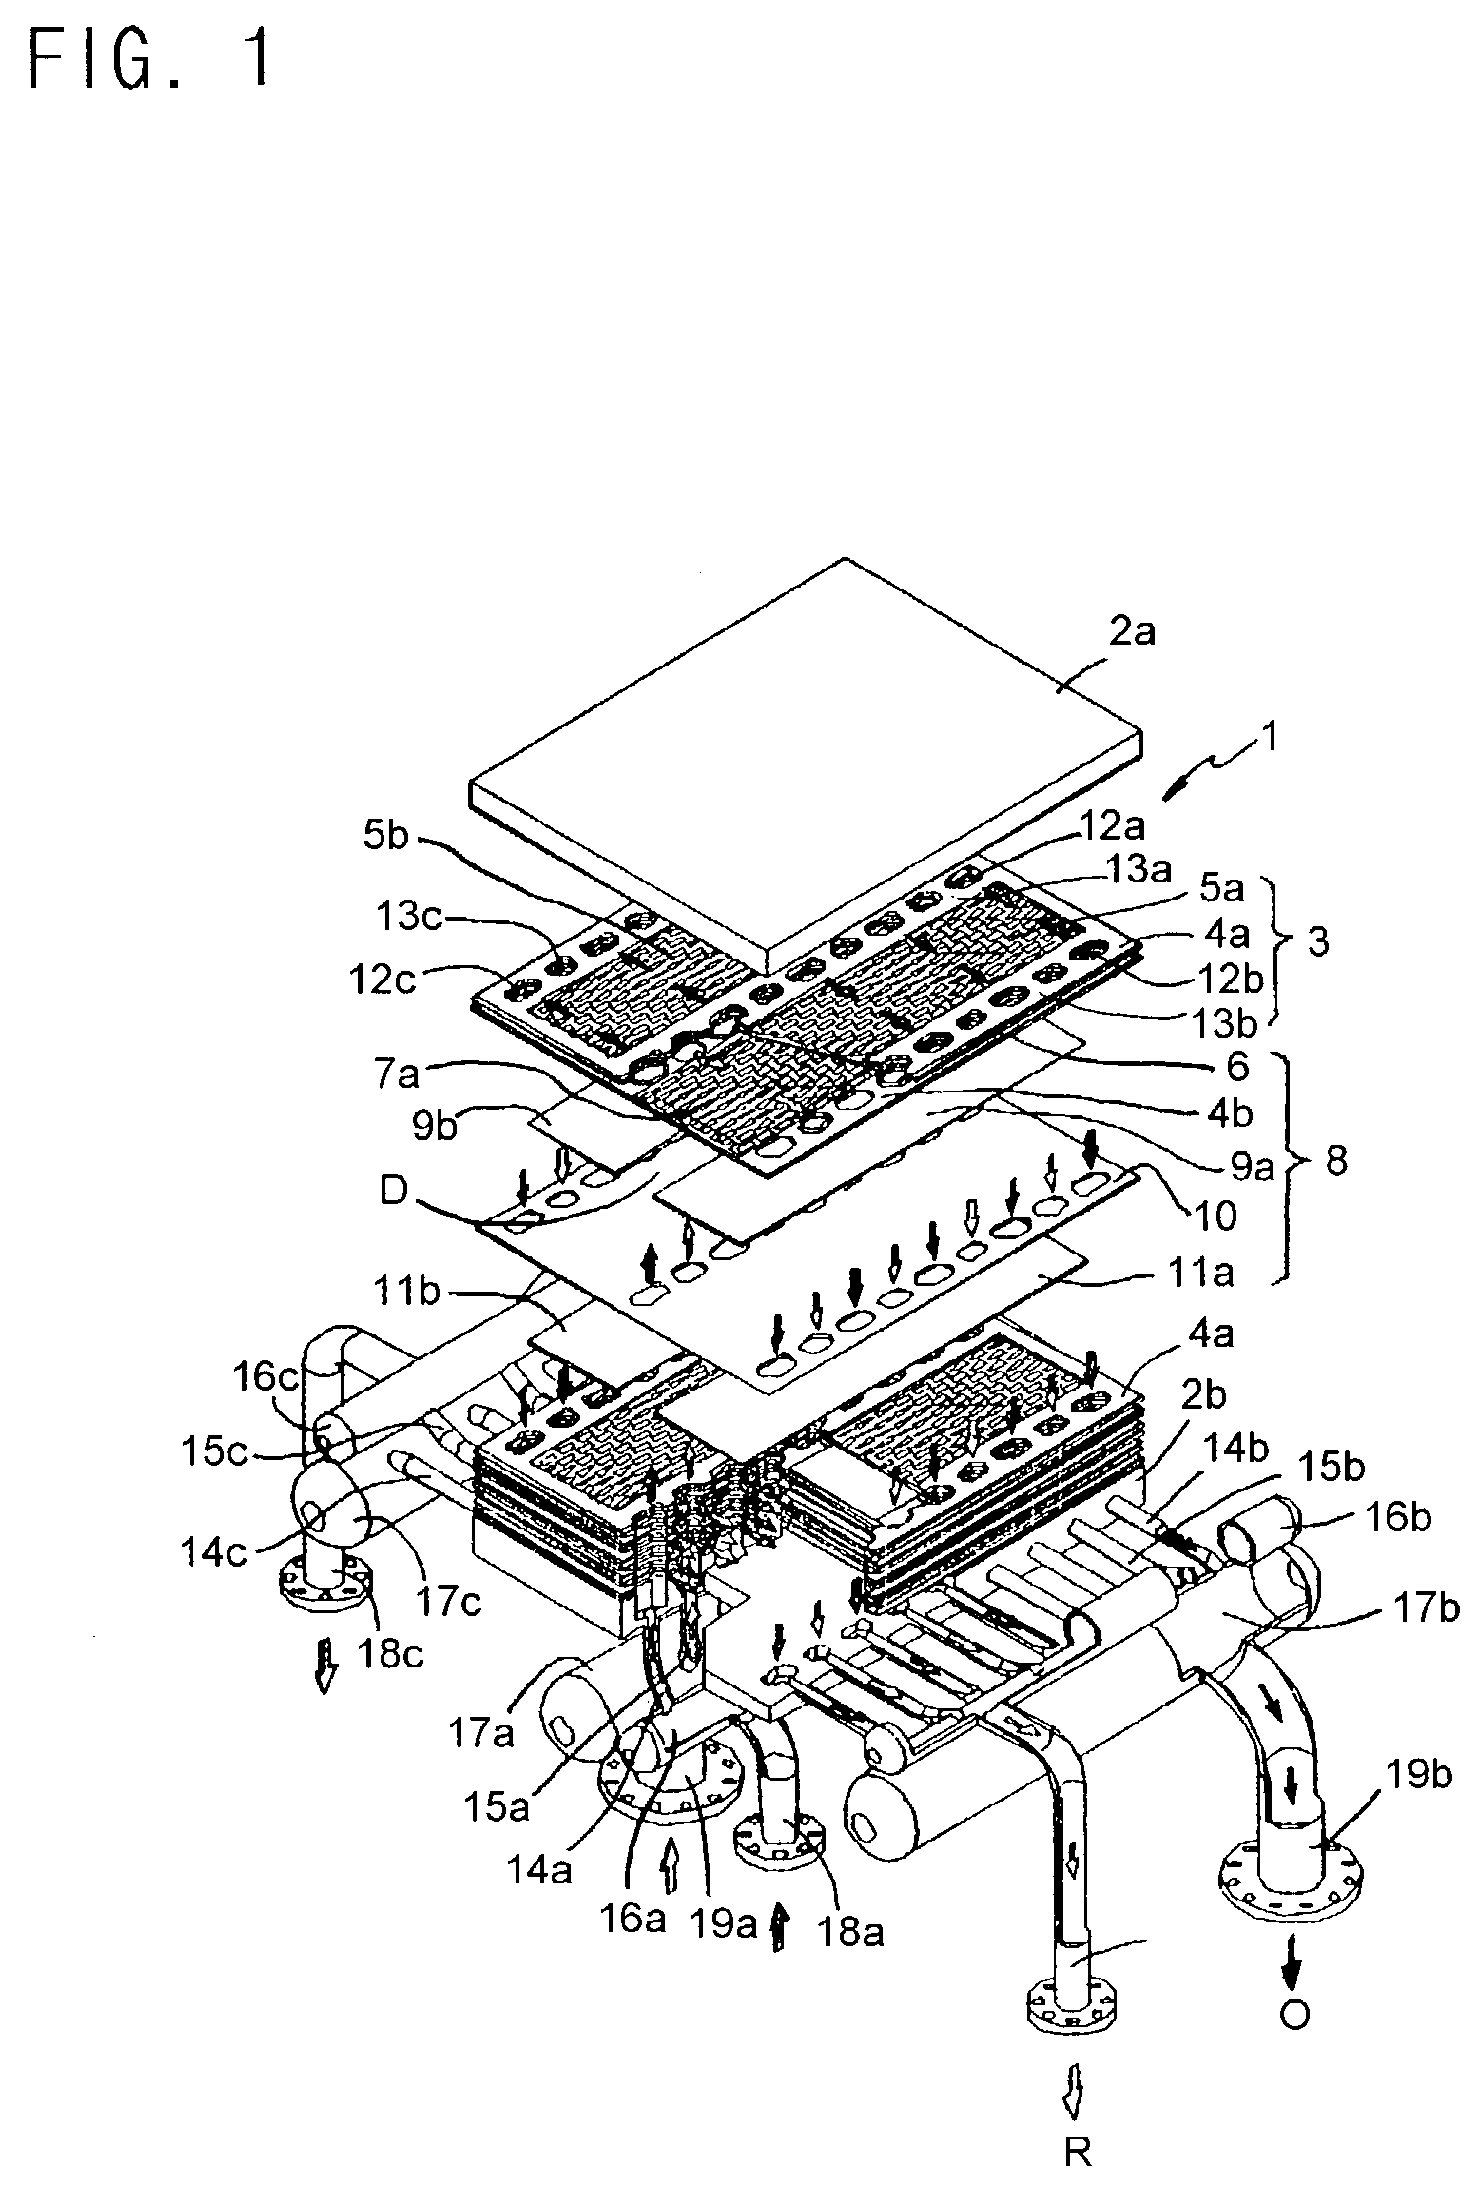 Molten carbonate fuel cell